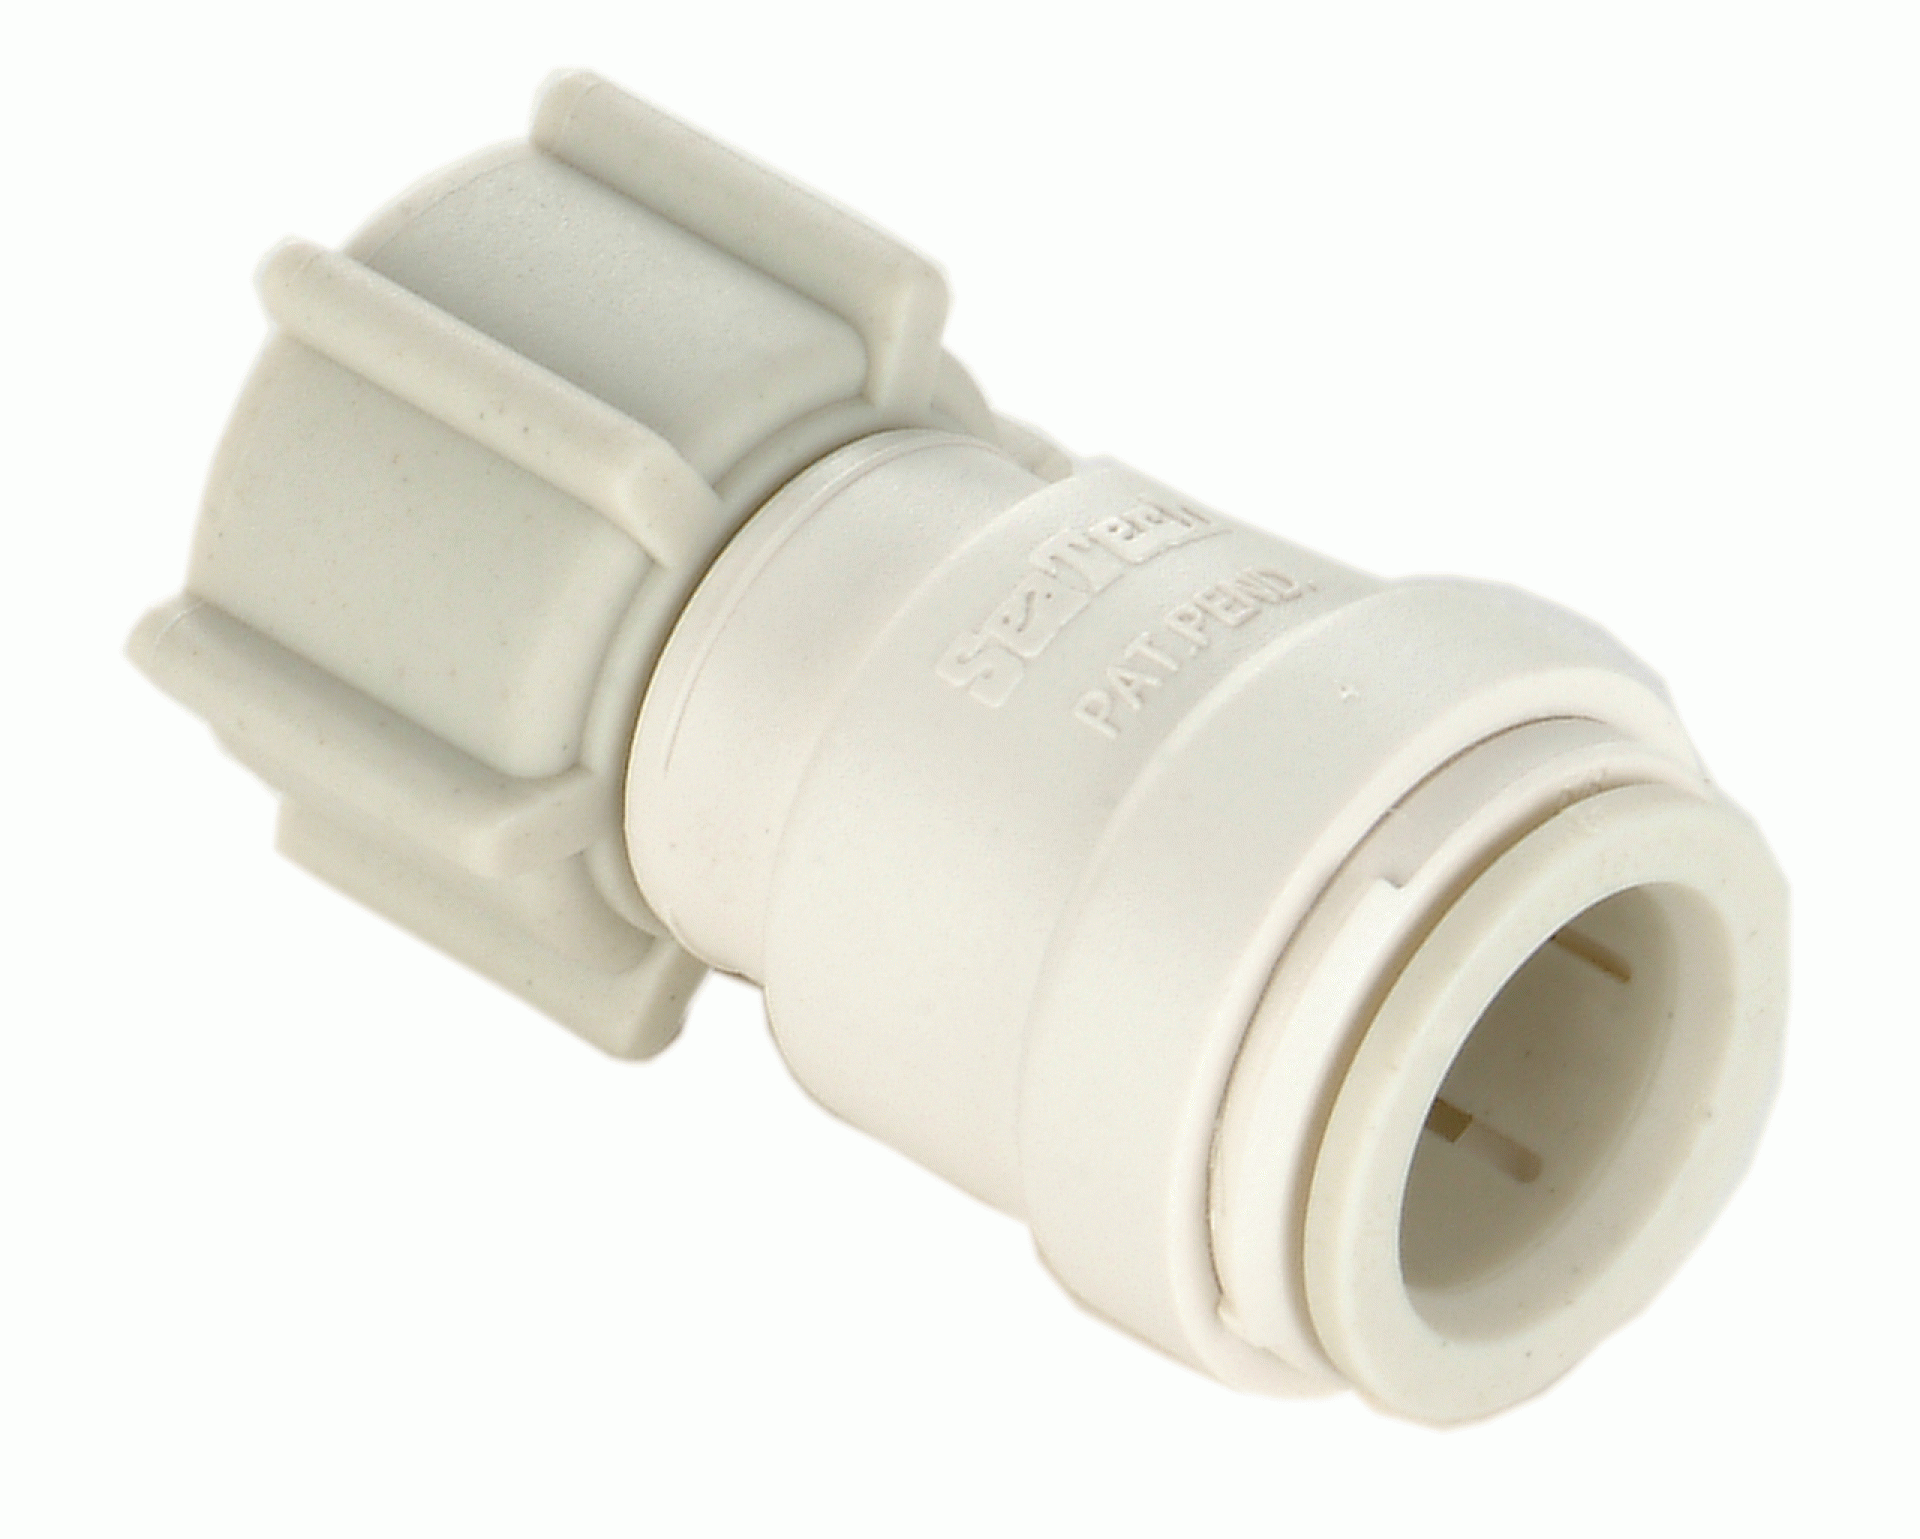 SEA TECH | 0959790 | FEMALE CONNECTOR 3/8" CTS X 1/2" NPS